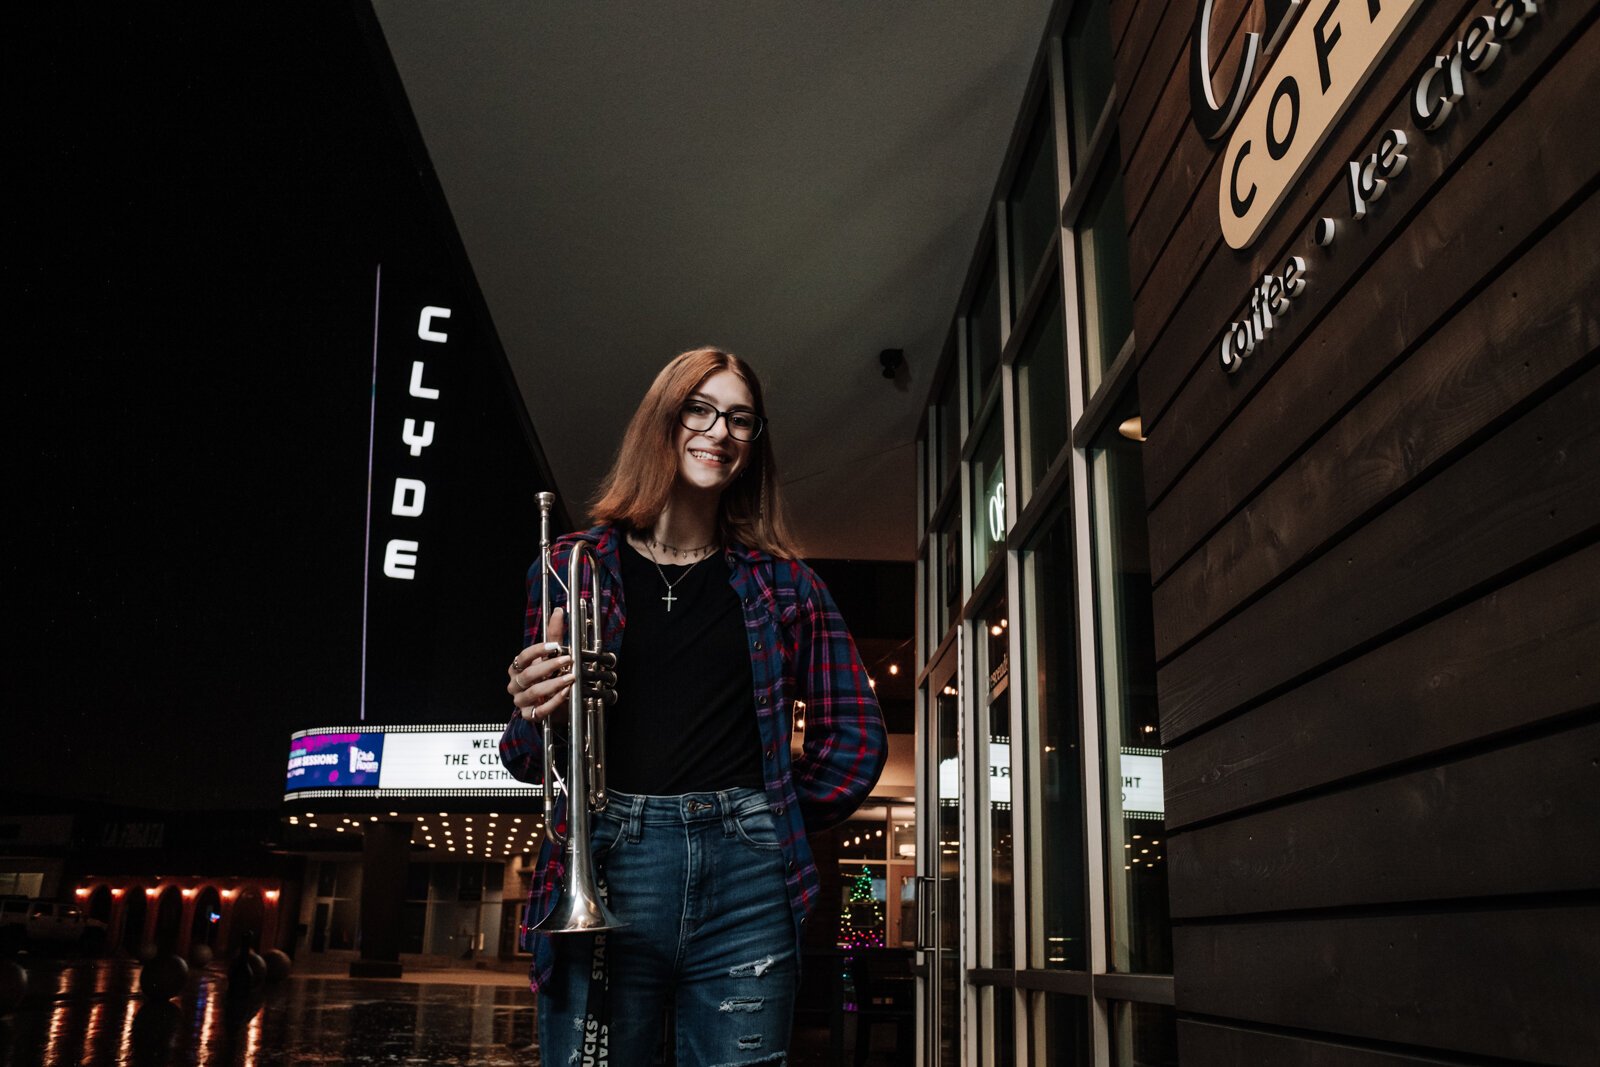 Amara Marion, an eighth grader at Memorial Park, poses with her trumpet at a hotspot for local music in Fort Wayne, the Clyde Theatre, Club Room, and Crescendo Coffee & More.